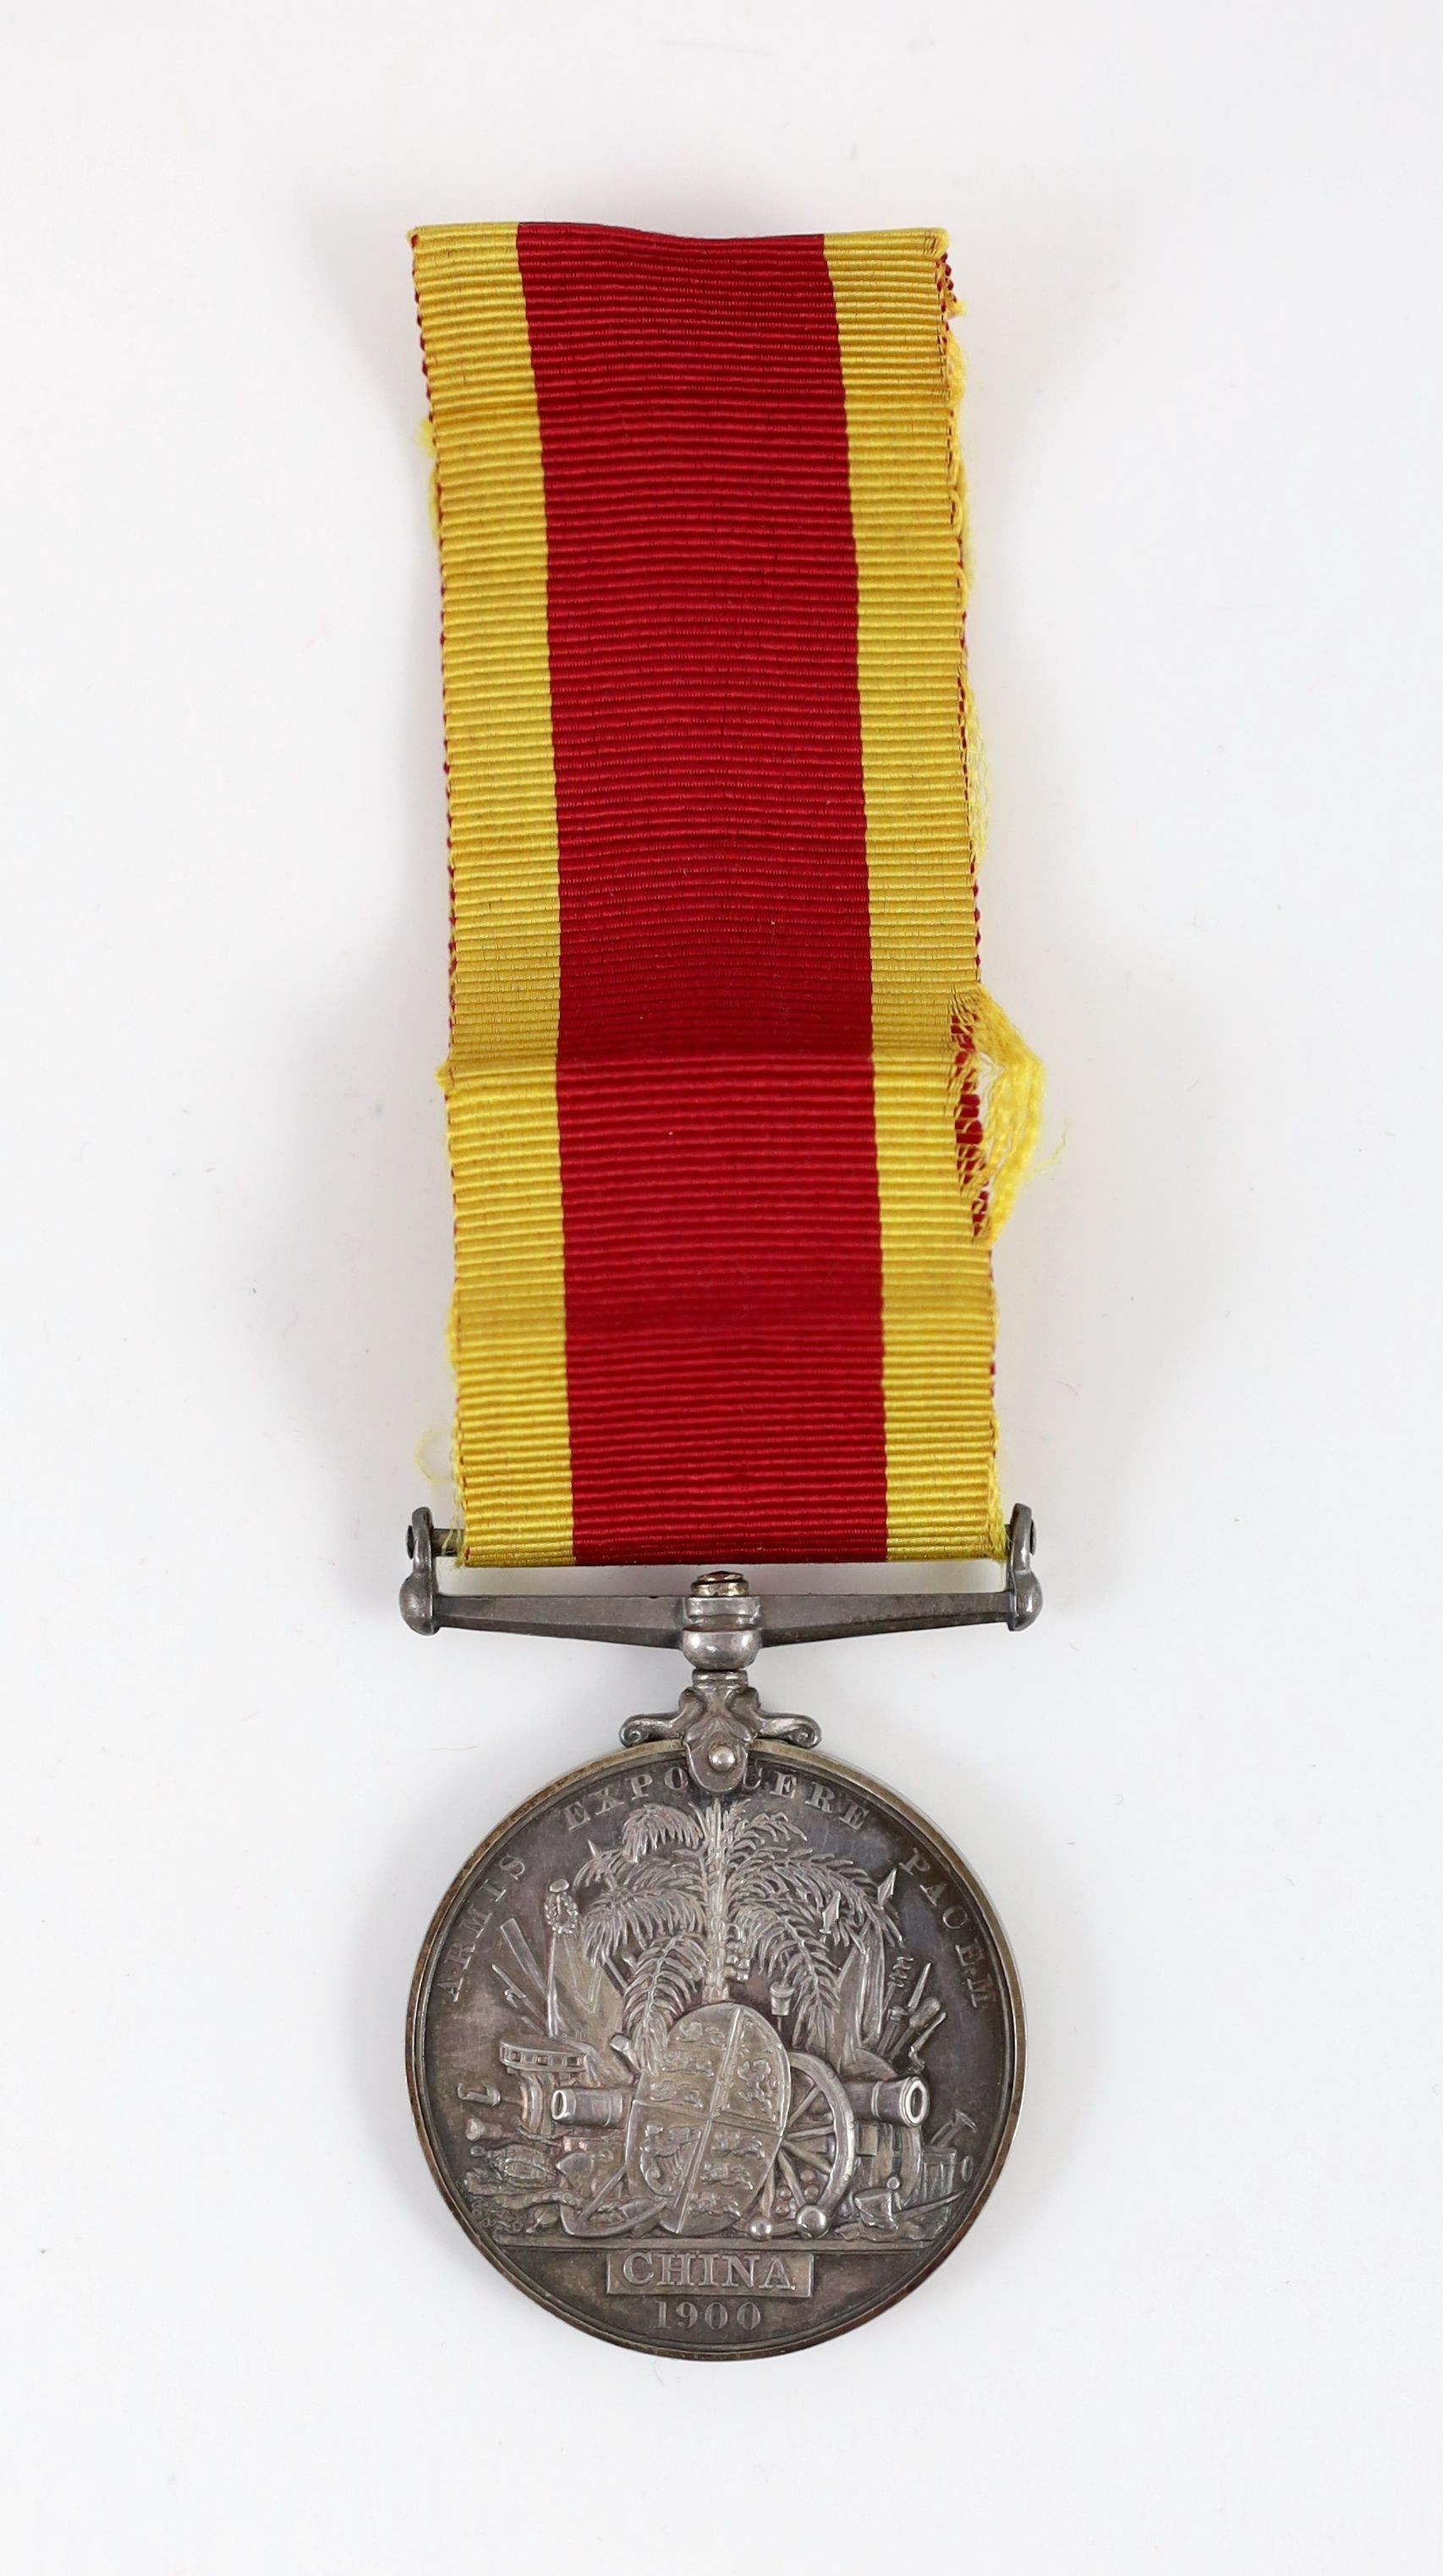 A China 1900 medal to L. -CORPL. F.W. FOWLER. SHANGHAI VOLS about Extremely FinePLEASE NOTE:- - Image 2 of 2